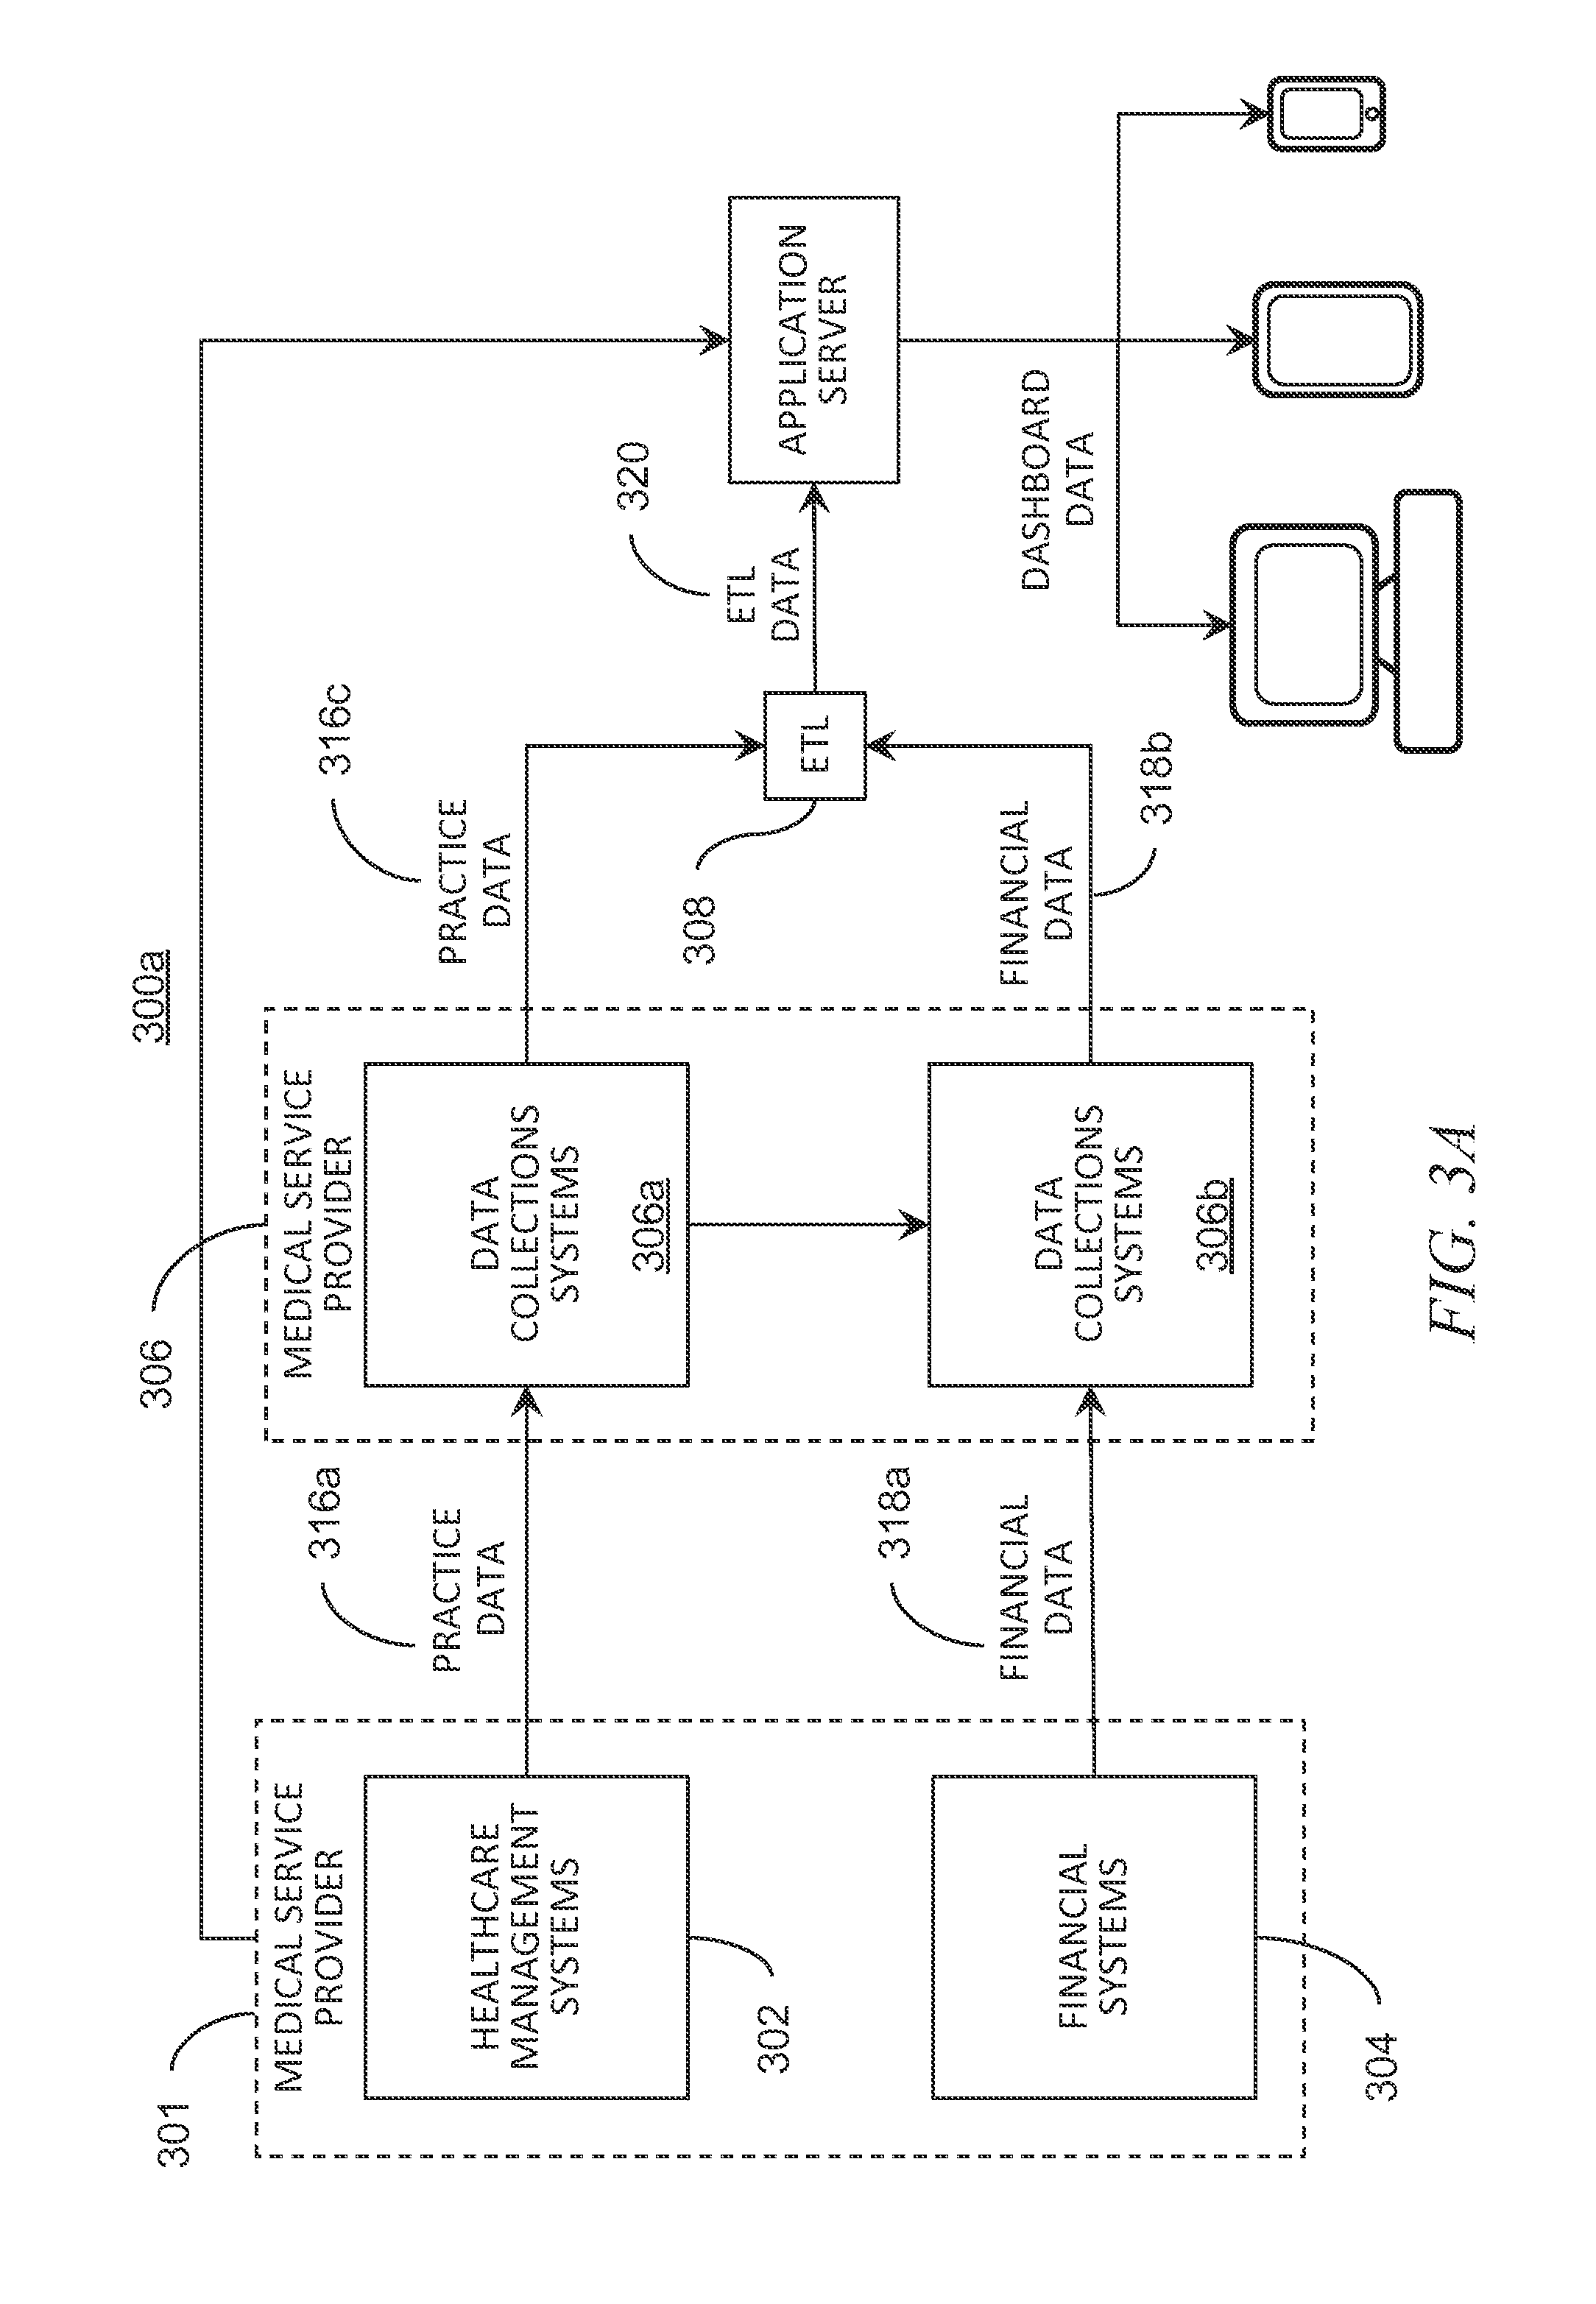 System and Method for Analyzing Revenue Cycle Management